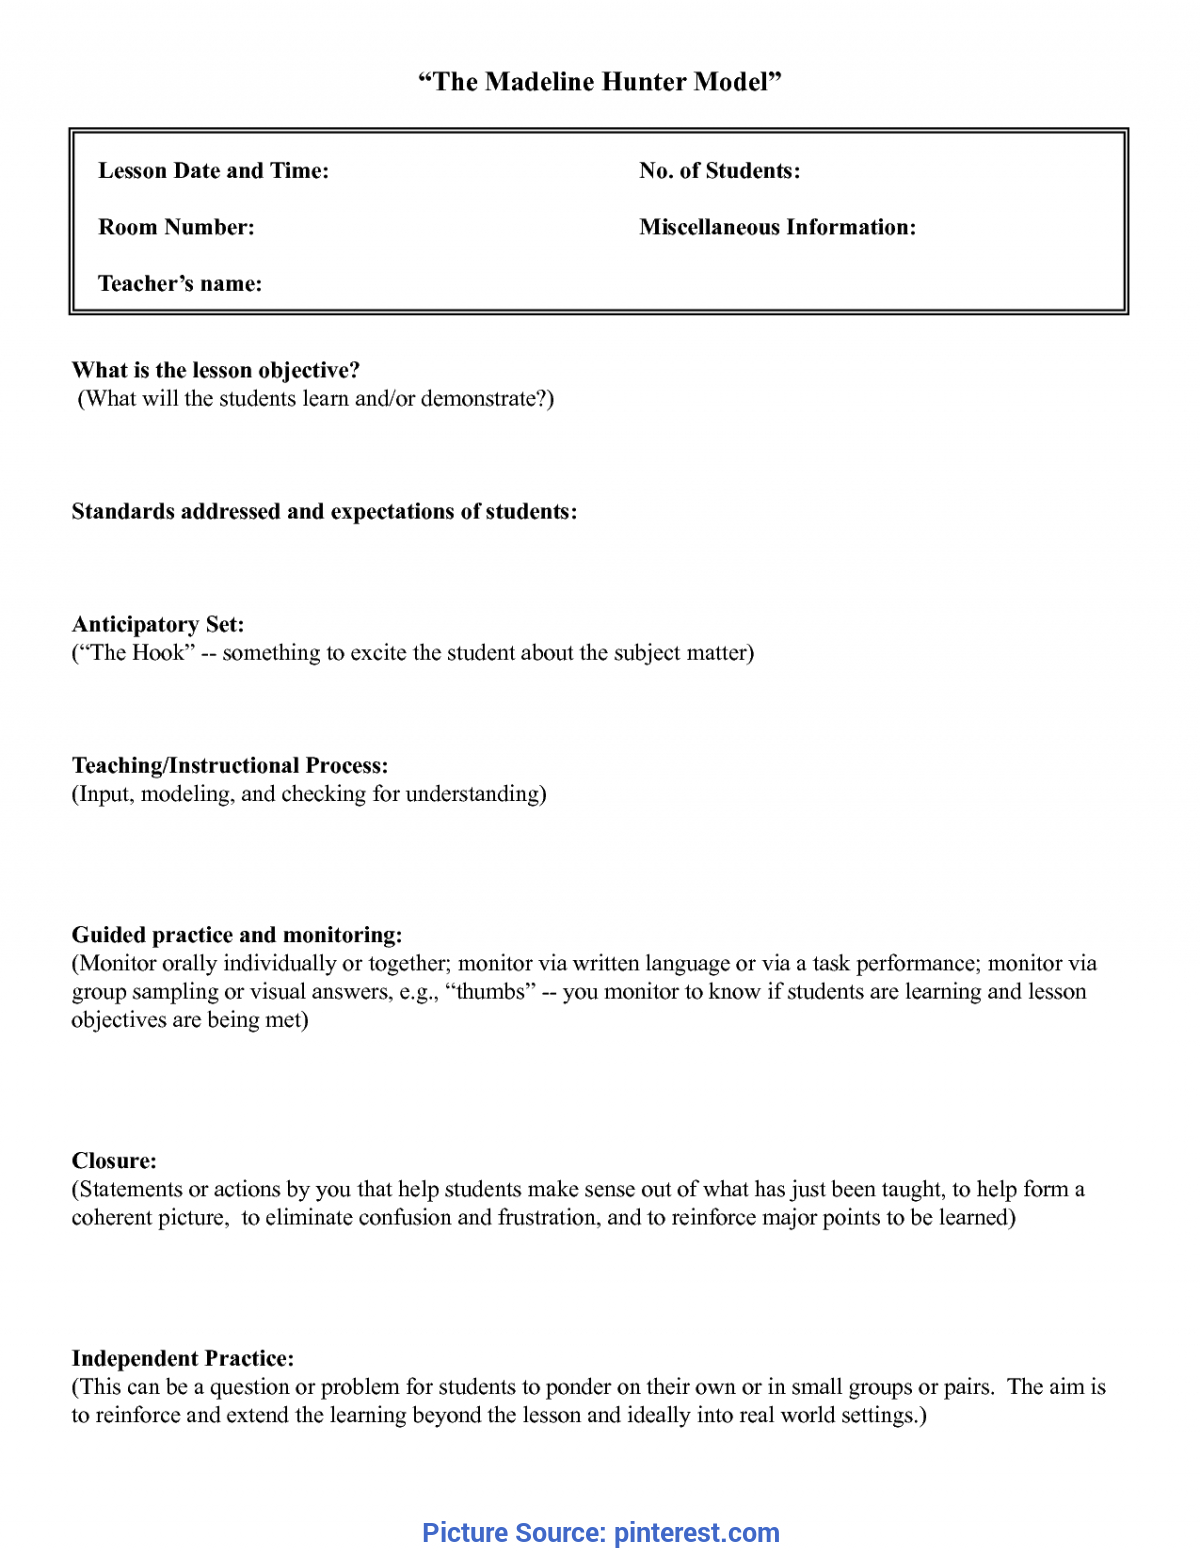 Madeline Hunter Lesson Plan Template Twiroo Com | Lesso With Regard To Madeline Hunter Lesson Plan Blank Template